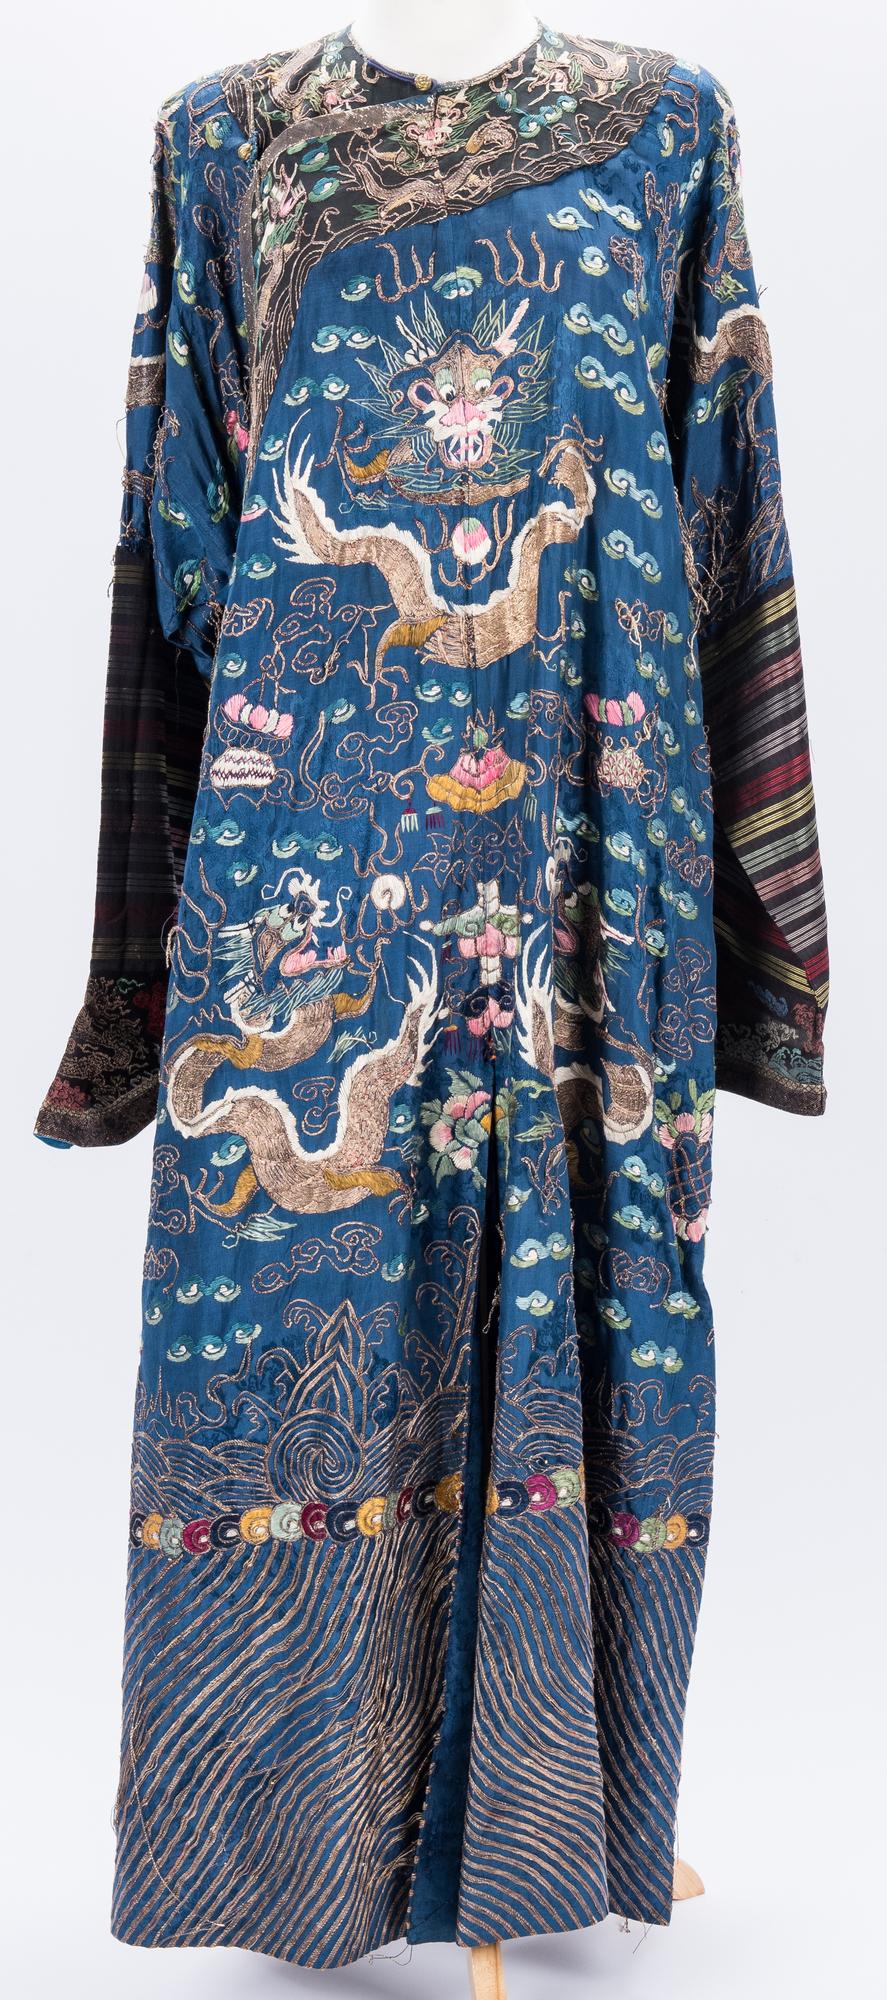 Chinese Theatrical Robe & Qing Tasseled Collar - Image 15 of 18